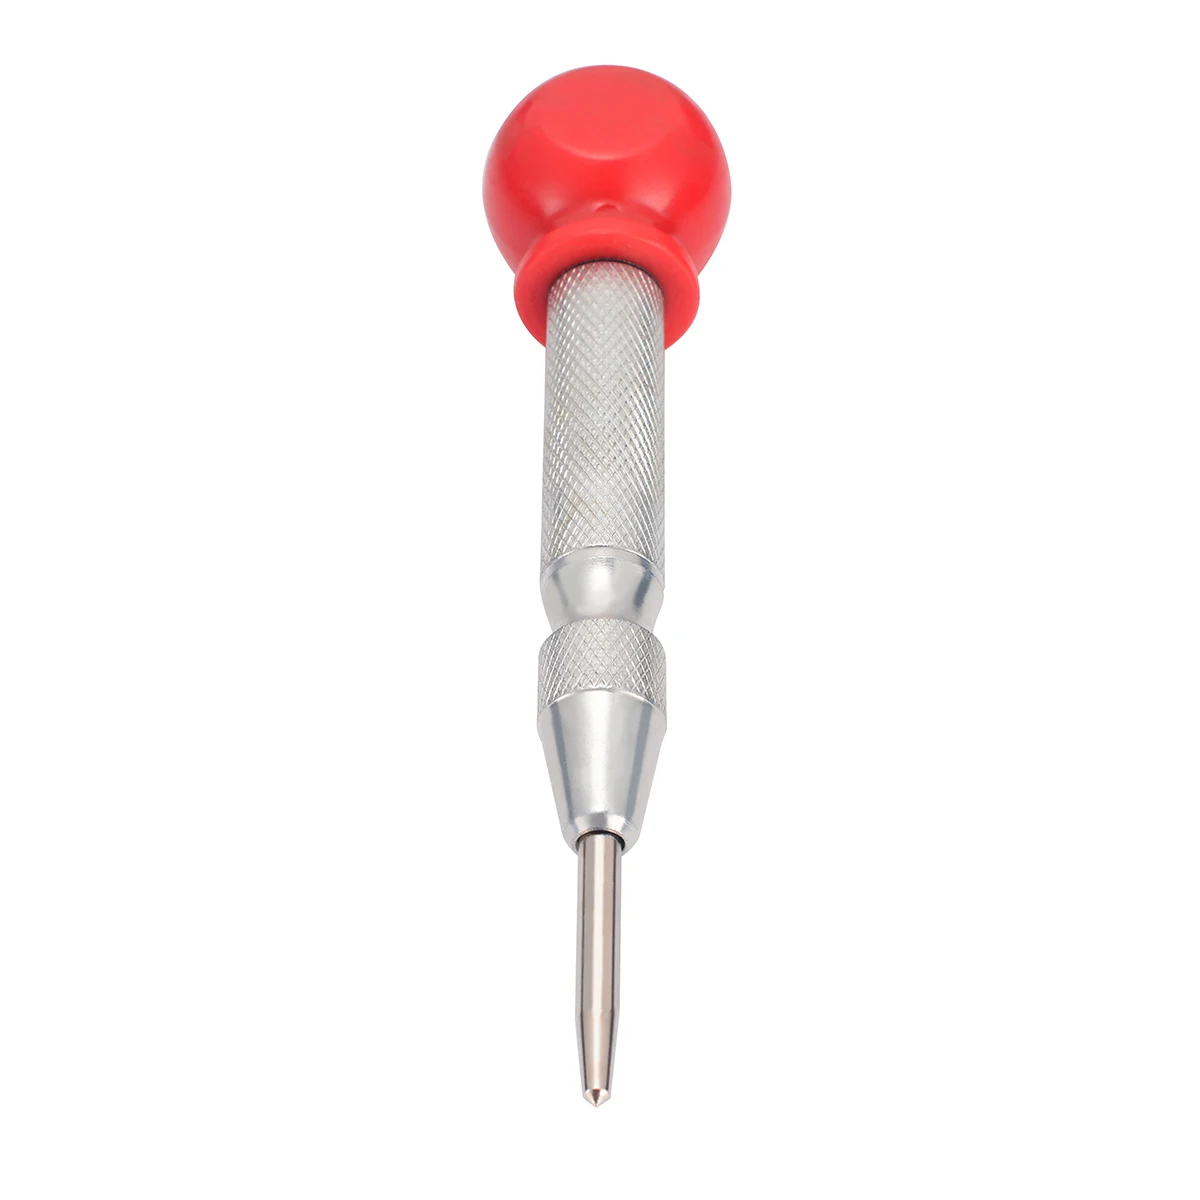 New 5 inch Spring Loaded Adjustable Automatic HSS Center Punch Hole Impact with Protective Sleeve For Marking Drilling Tool